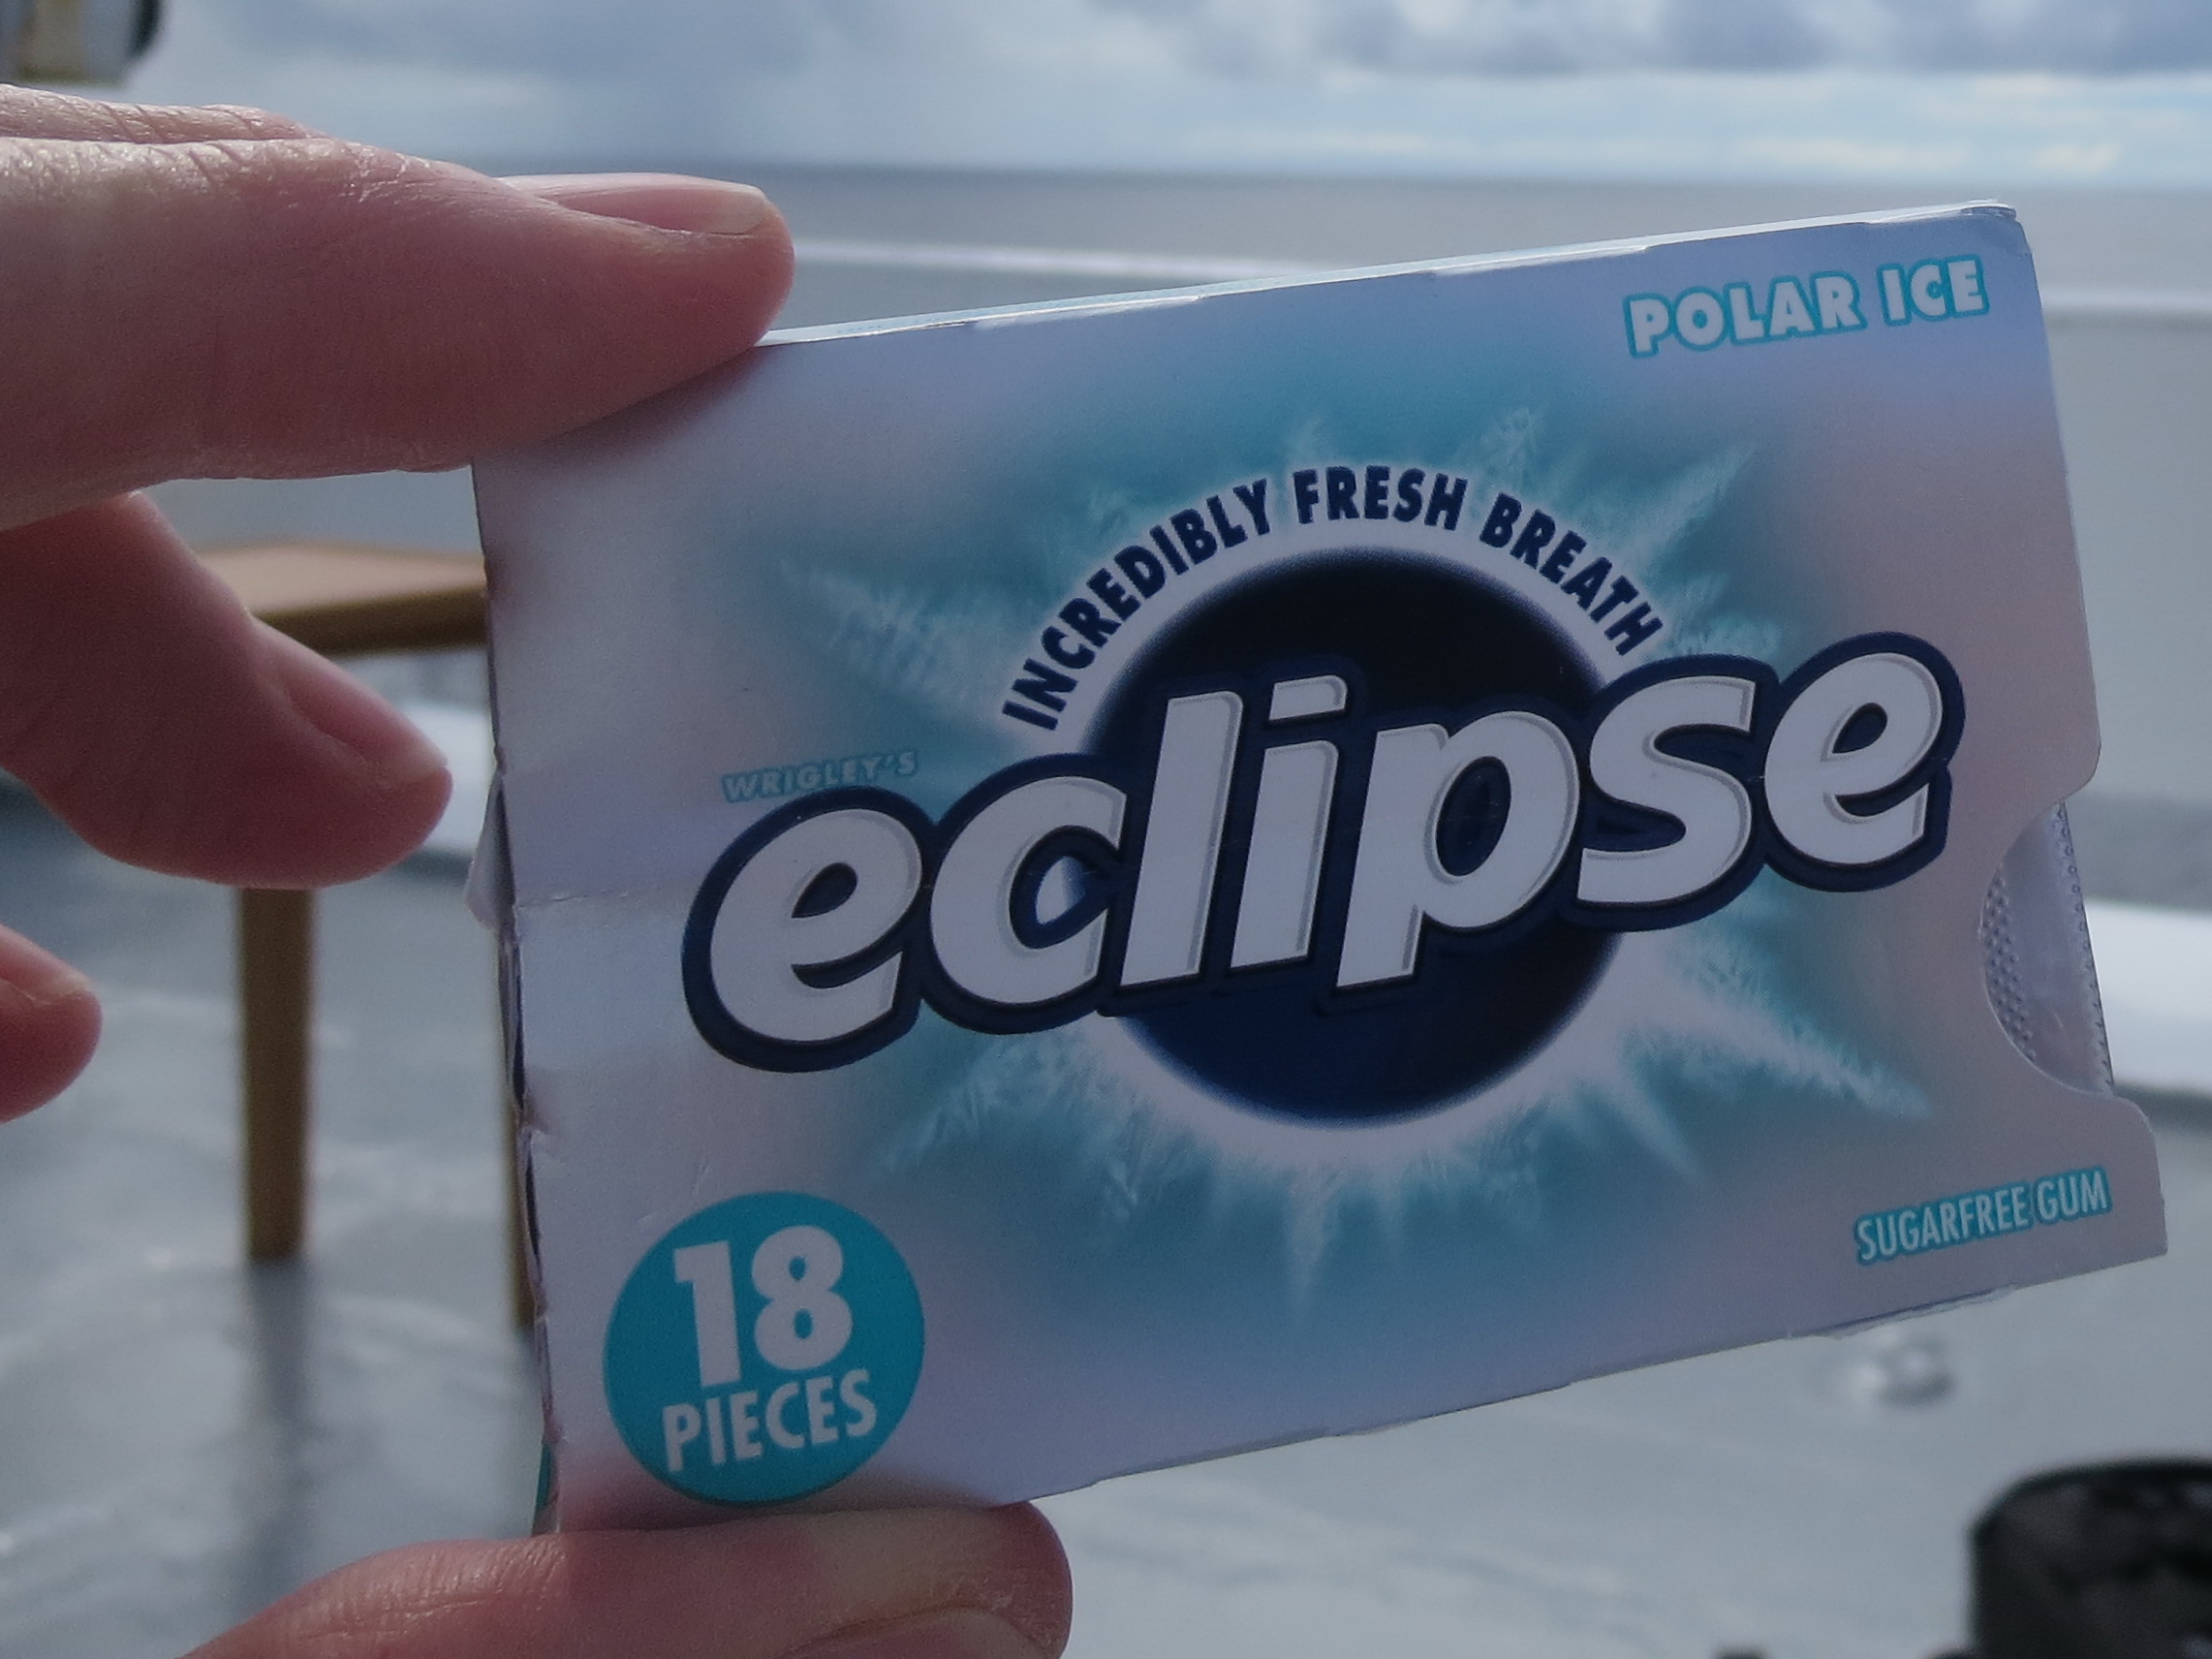 Eclipse chewing gum of course